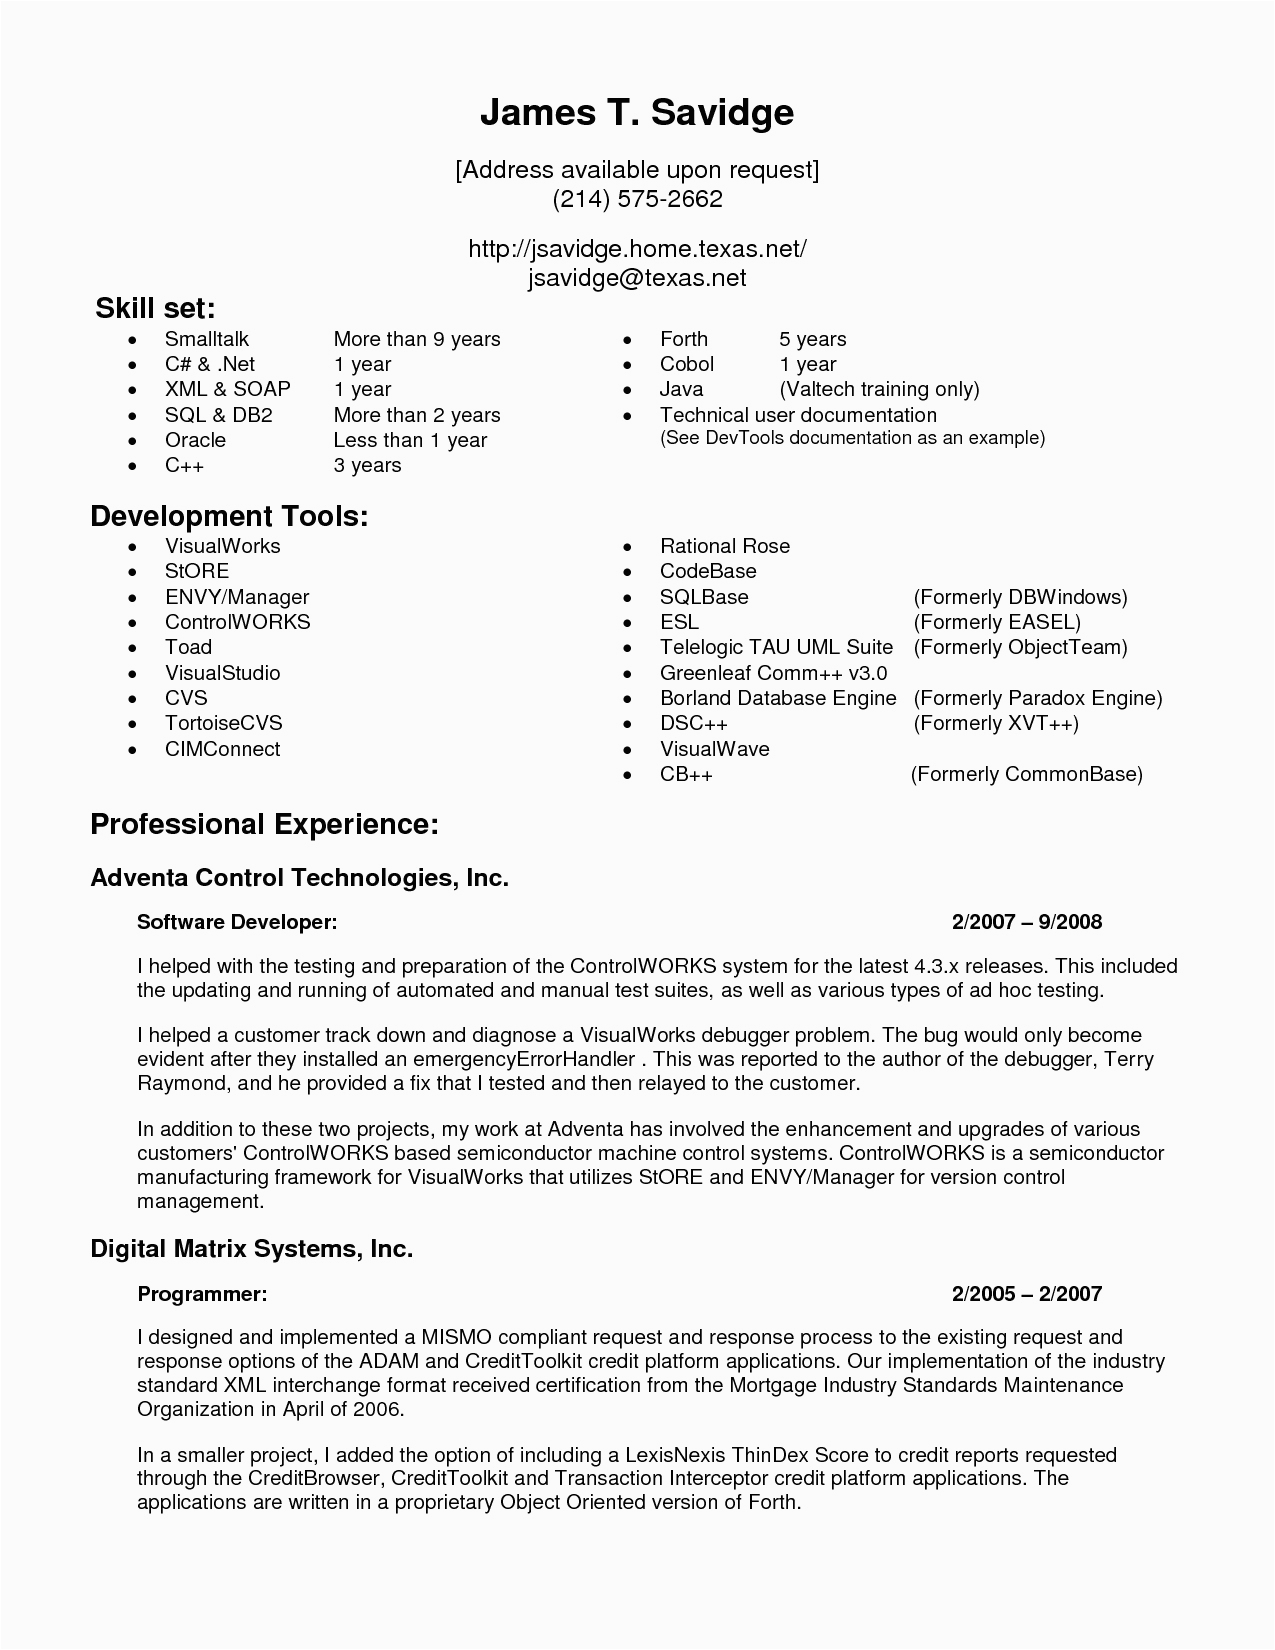 5 years experience resume format